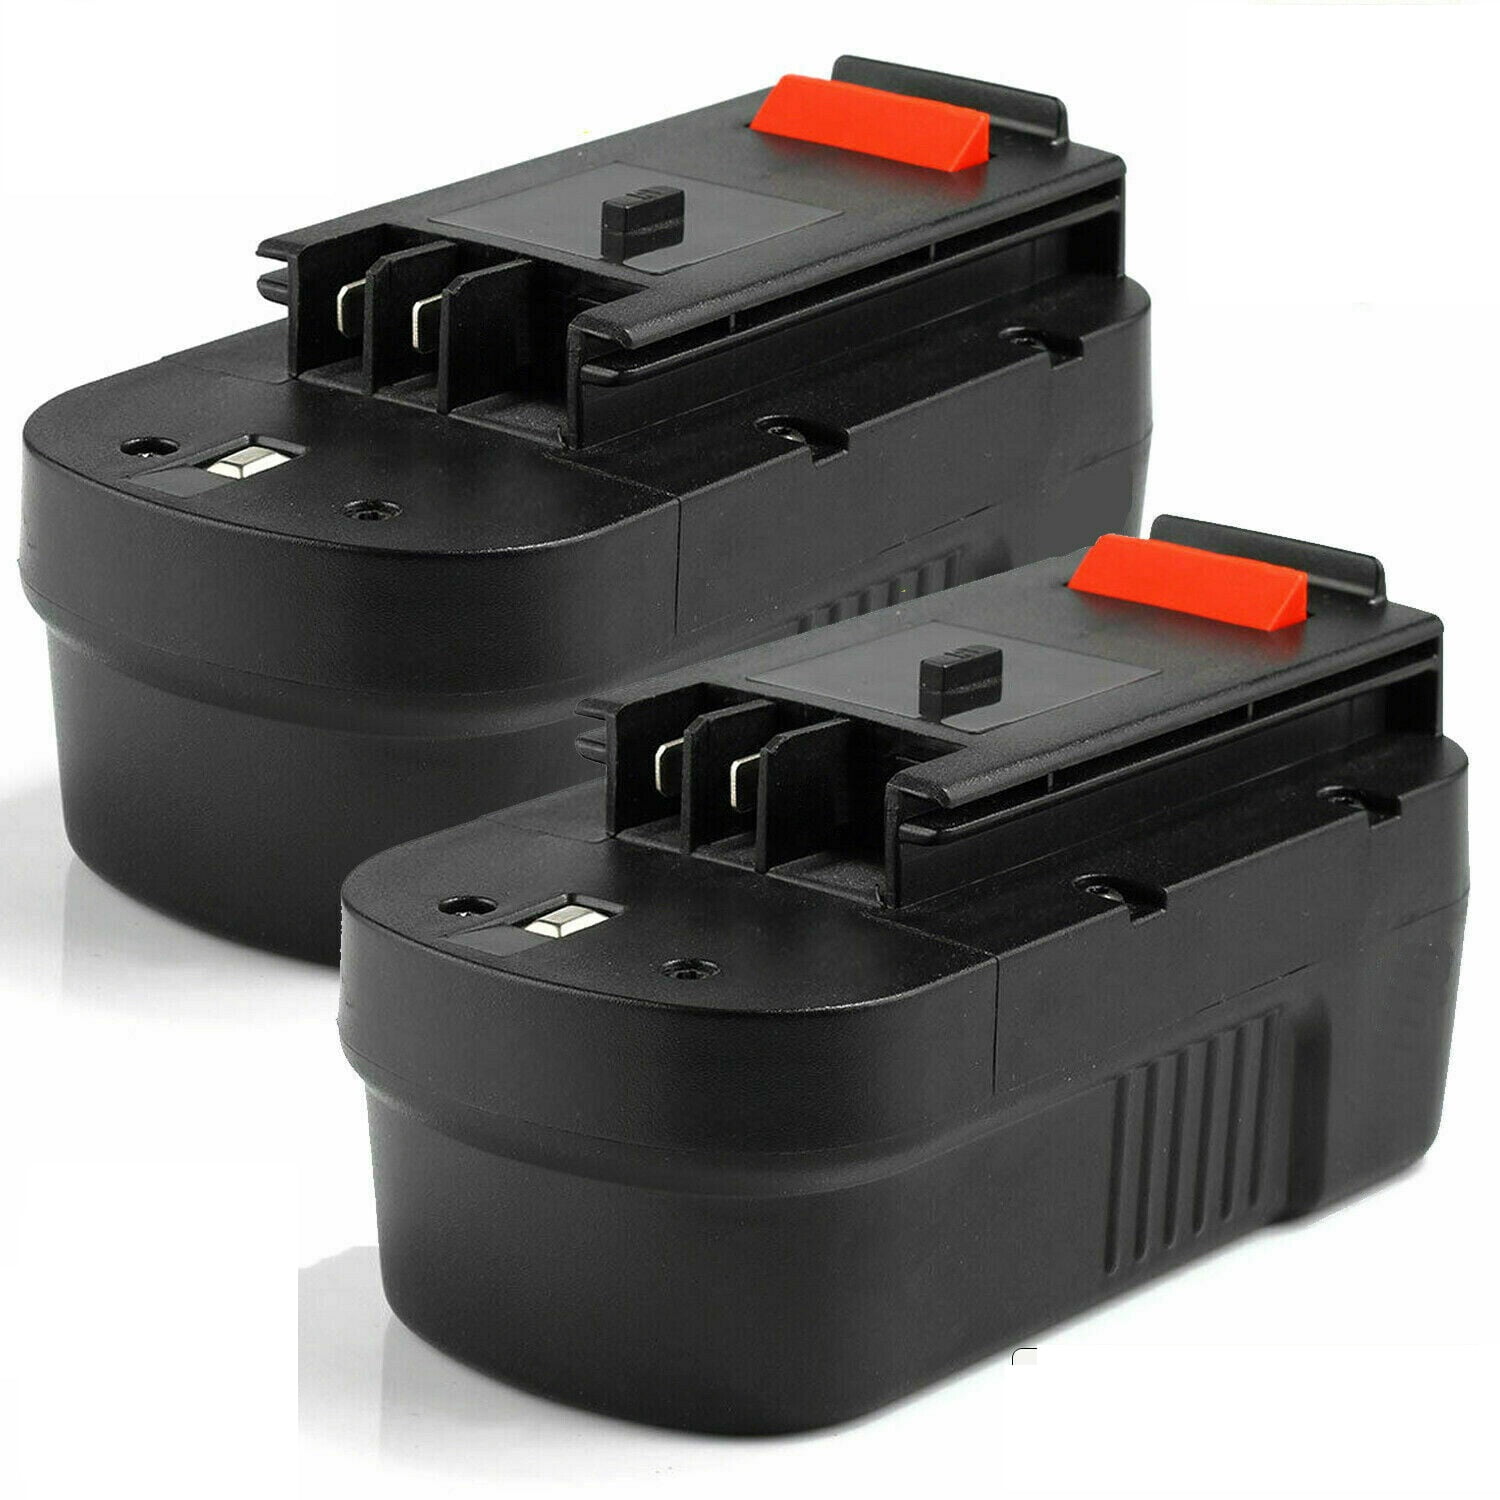 Replacement 18V Battery for Black & Decker Hpb18 | CD182K-2 by Factory Essentials - 3000 mAh - NiCd (2 Pack)